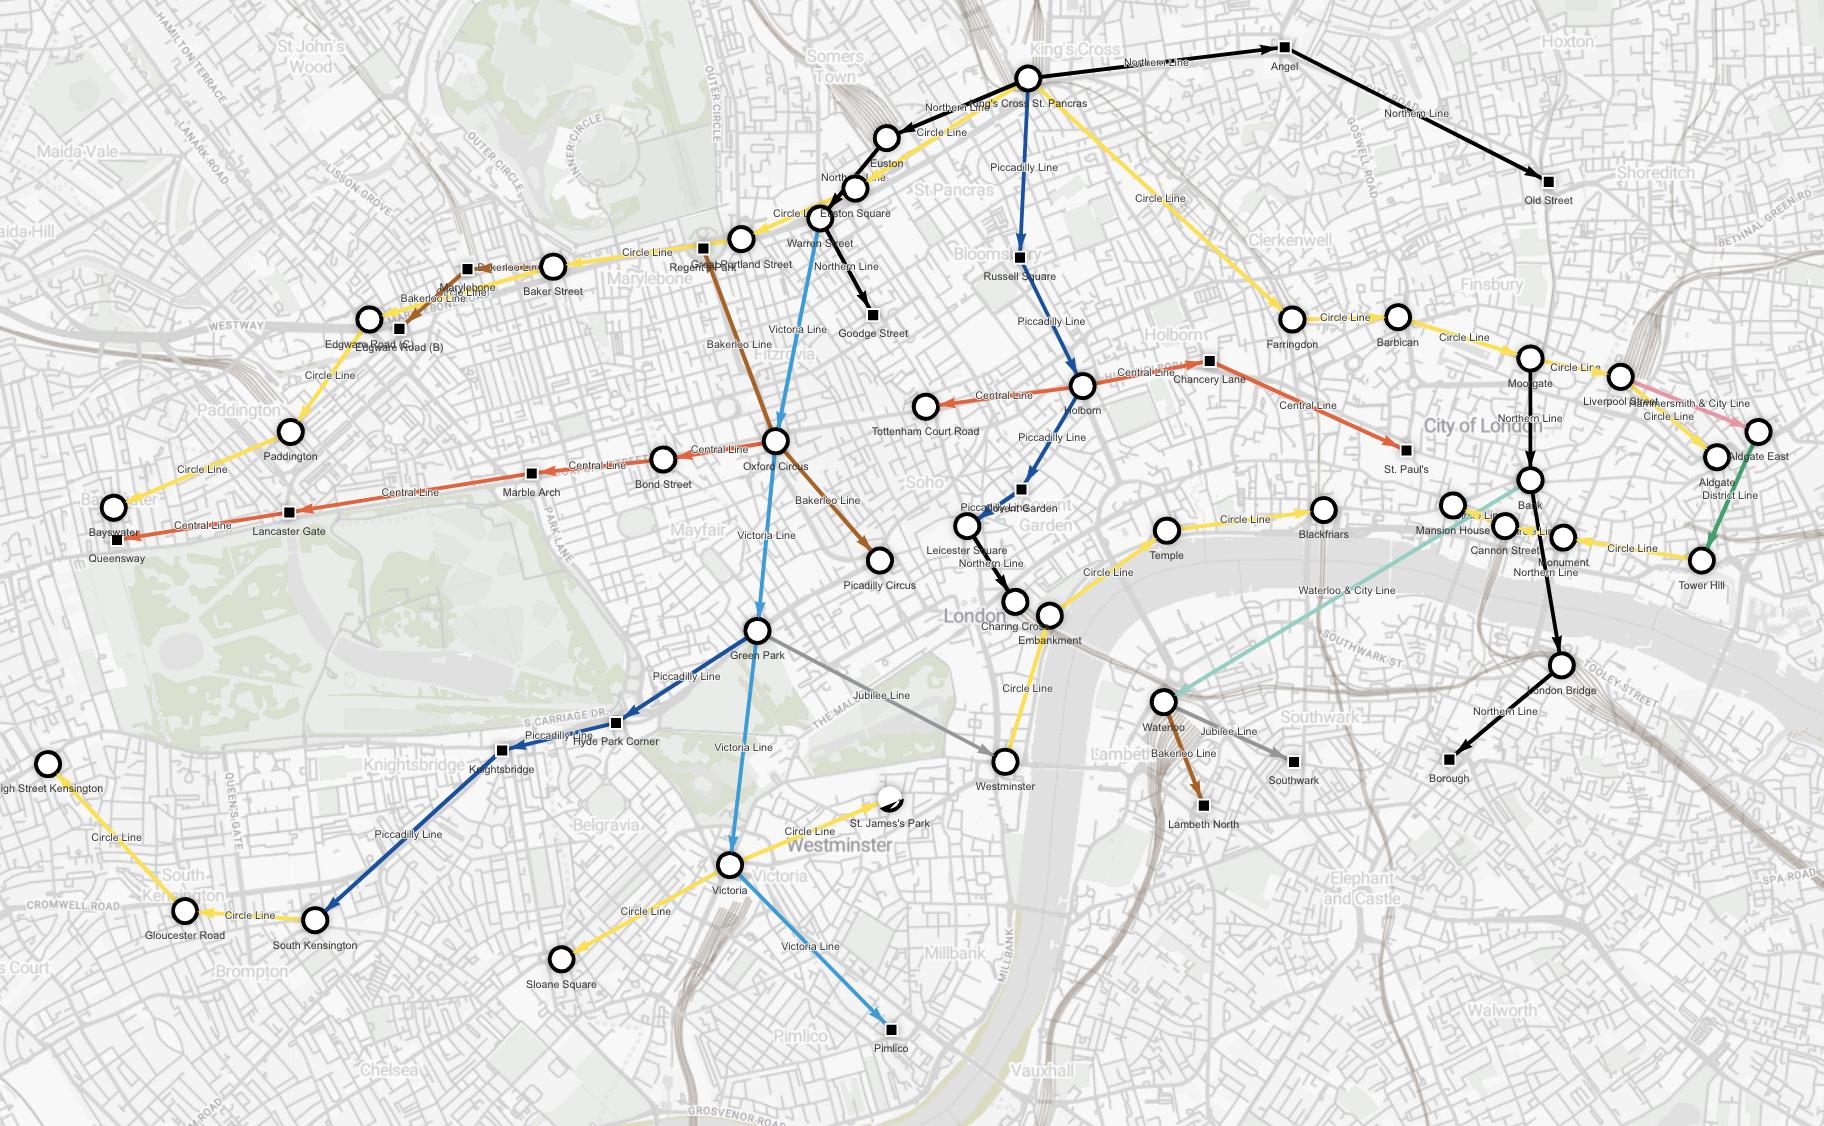 Data visualization - stations you can get to from St. Pancras in zone 1 